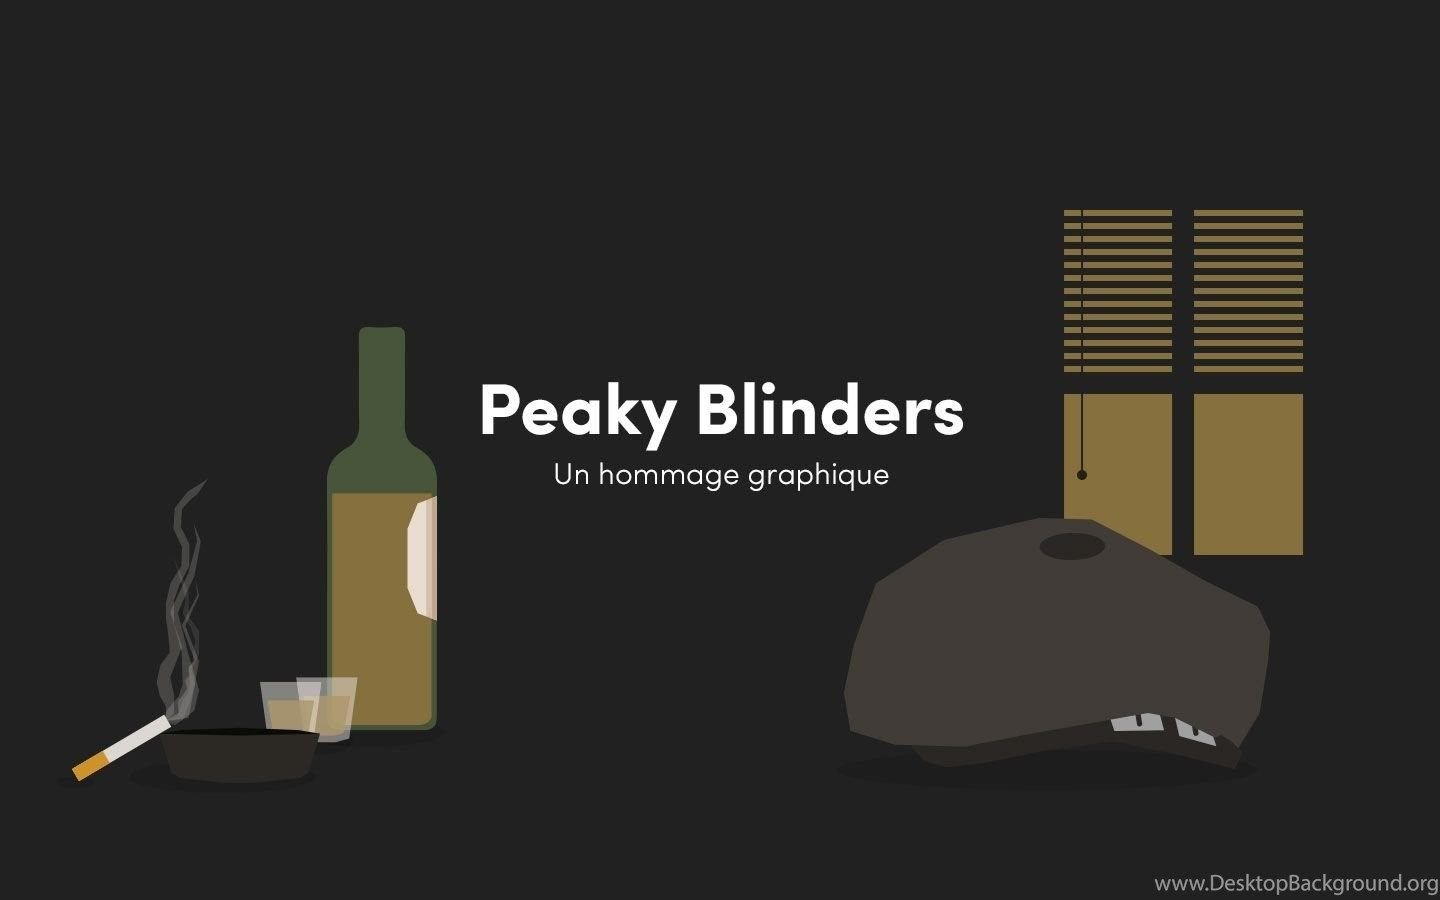 French Design Index Award › Peaky Blinders Un Hommage Graphique